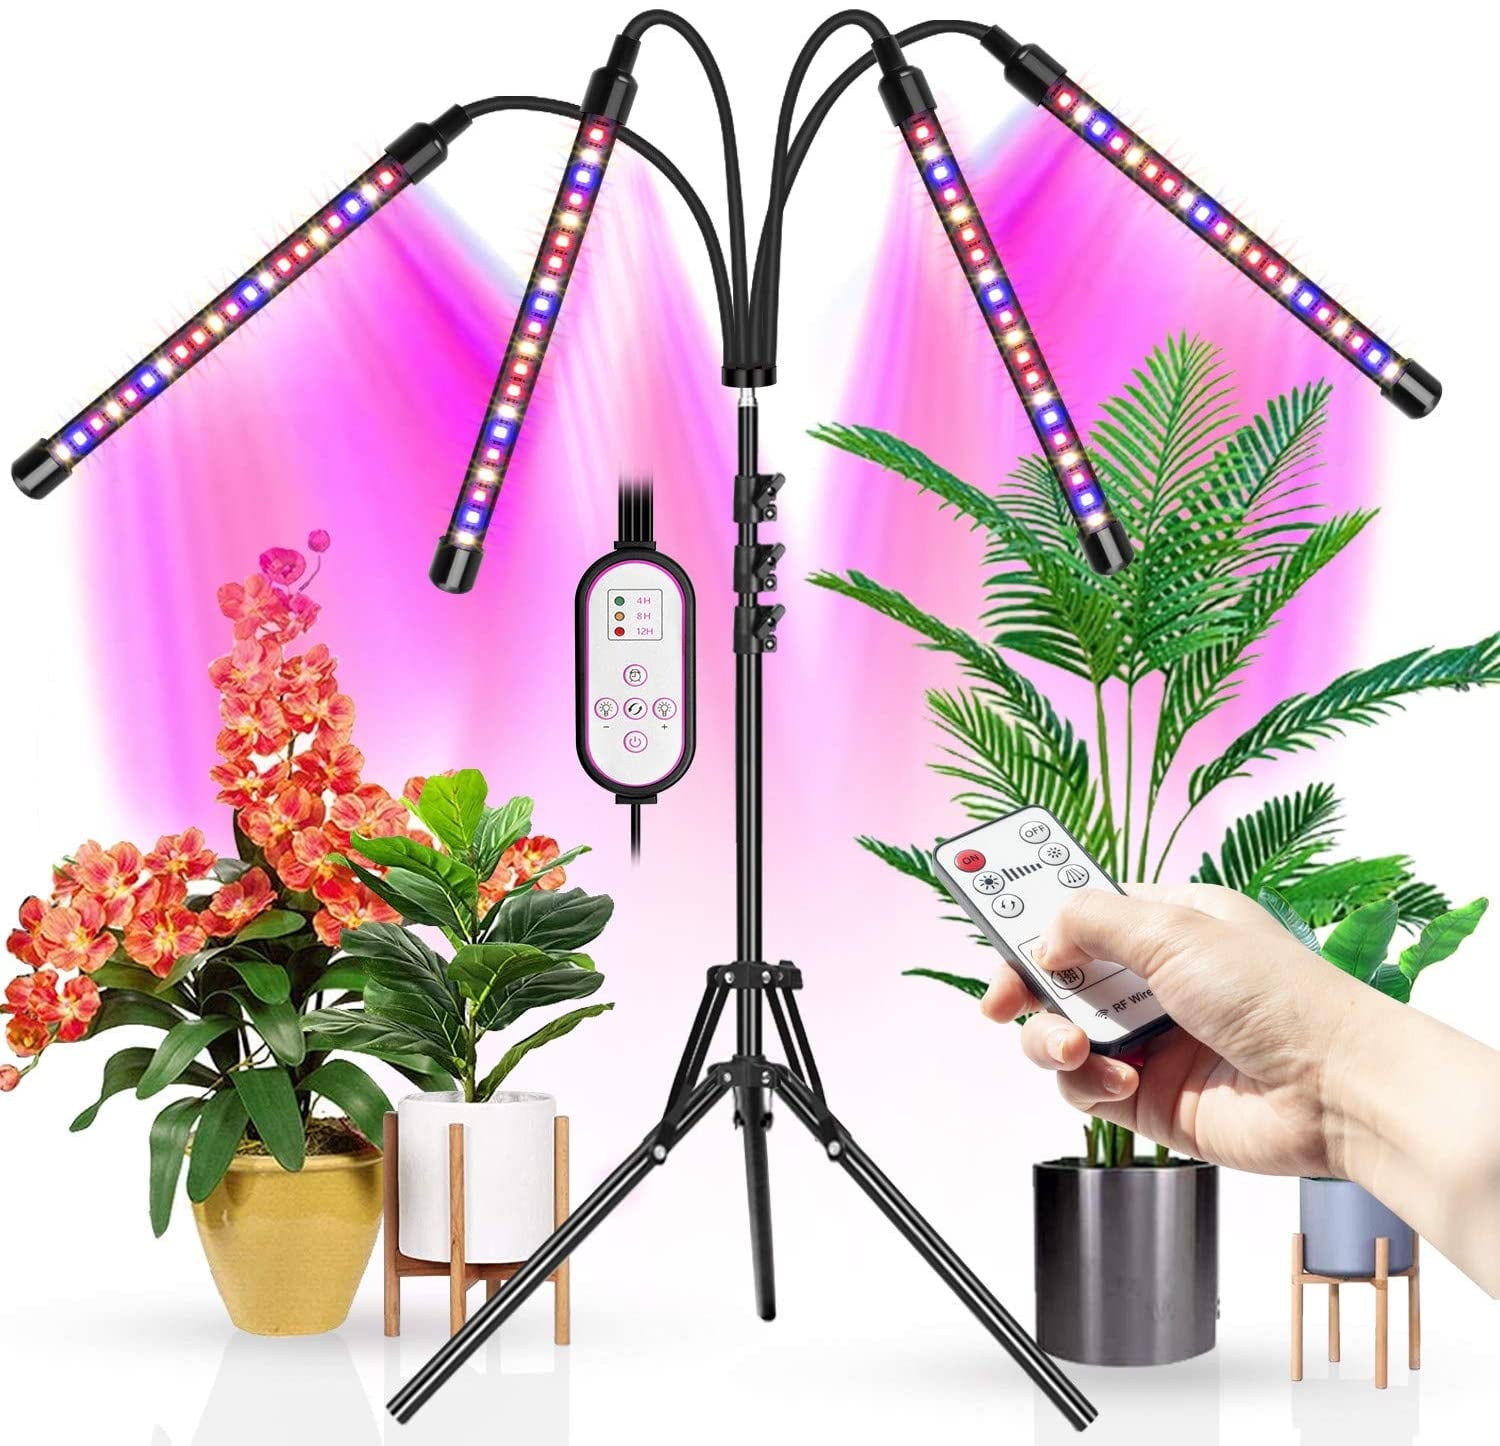 LED Grow Lights: The Best System for Indoor Plants